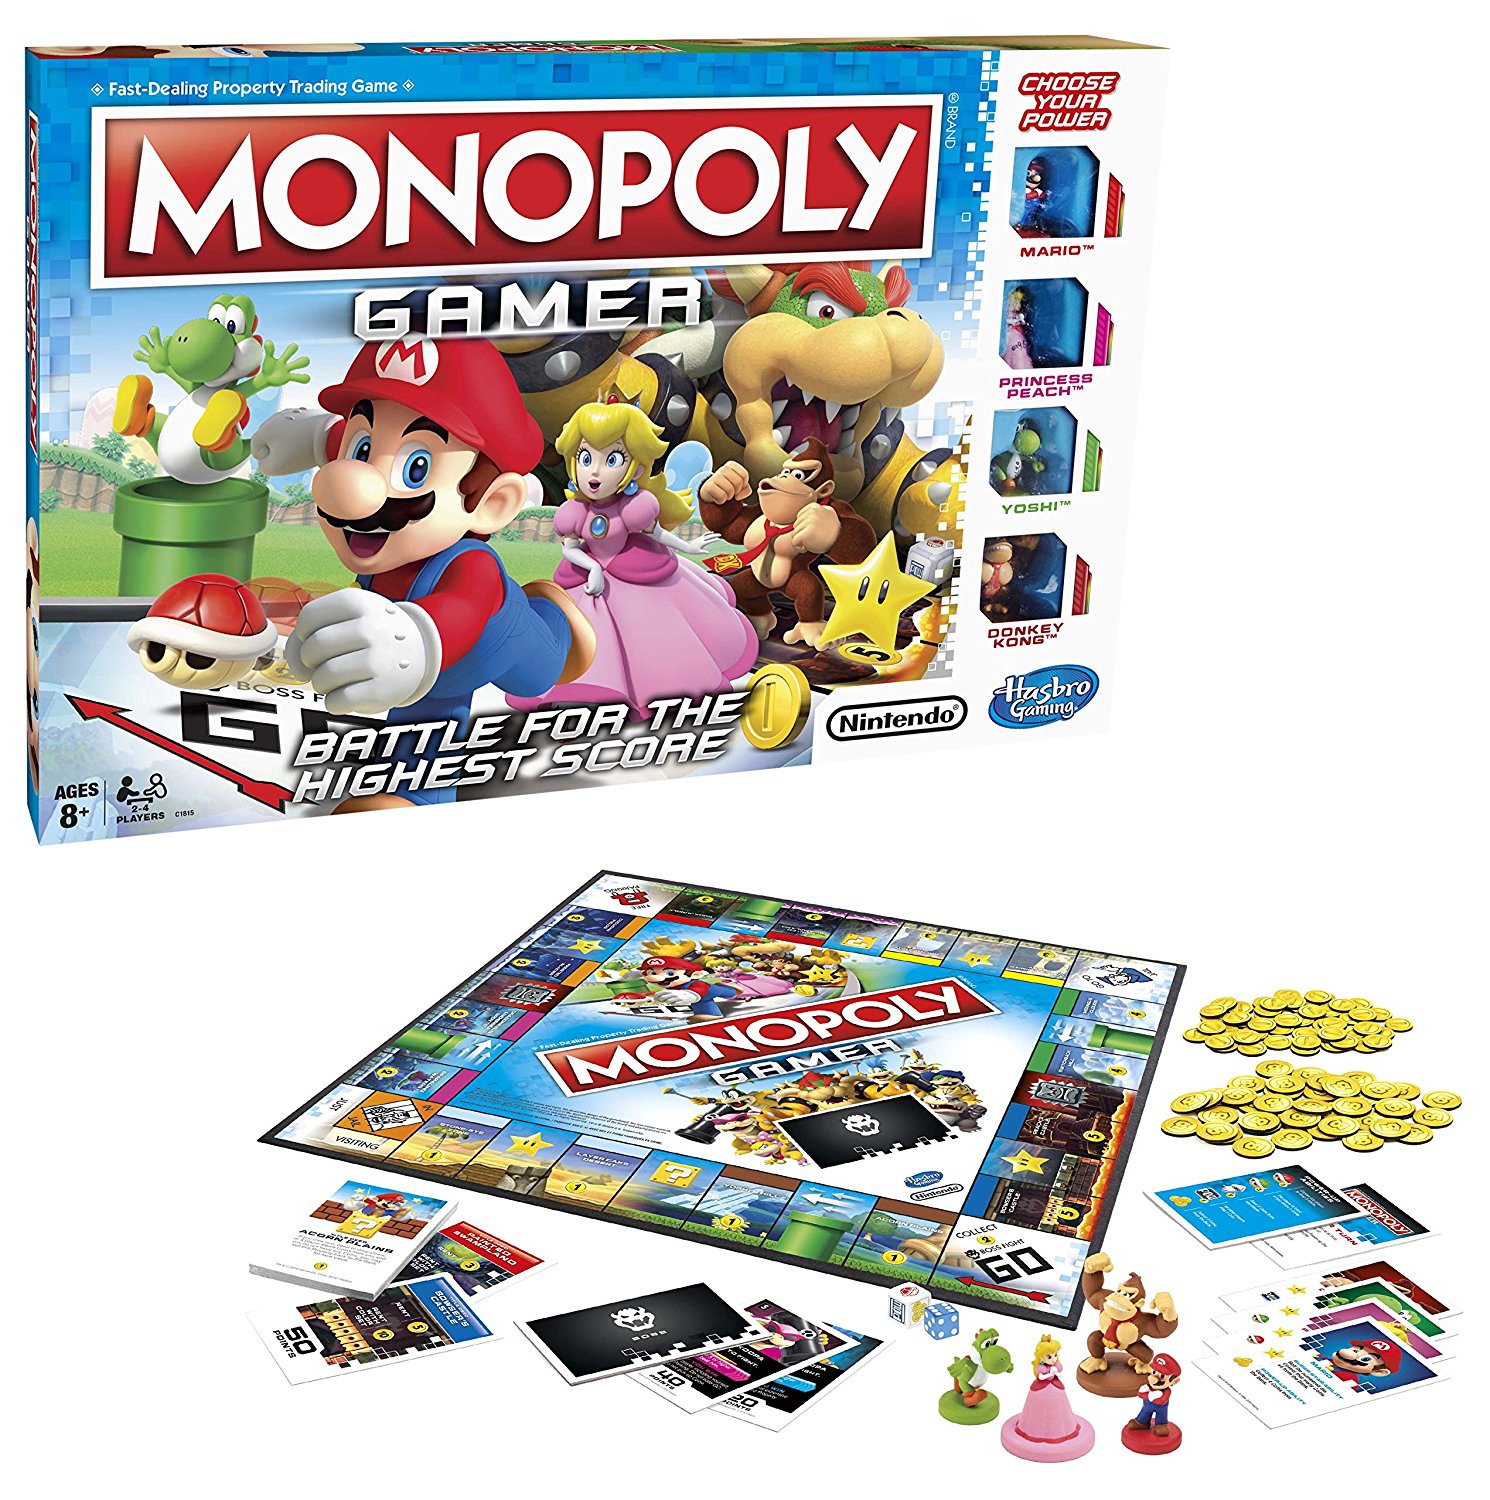 Monopoly Gamer Only $12.60!